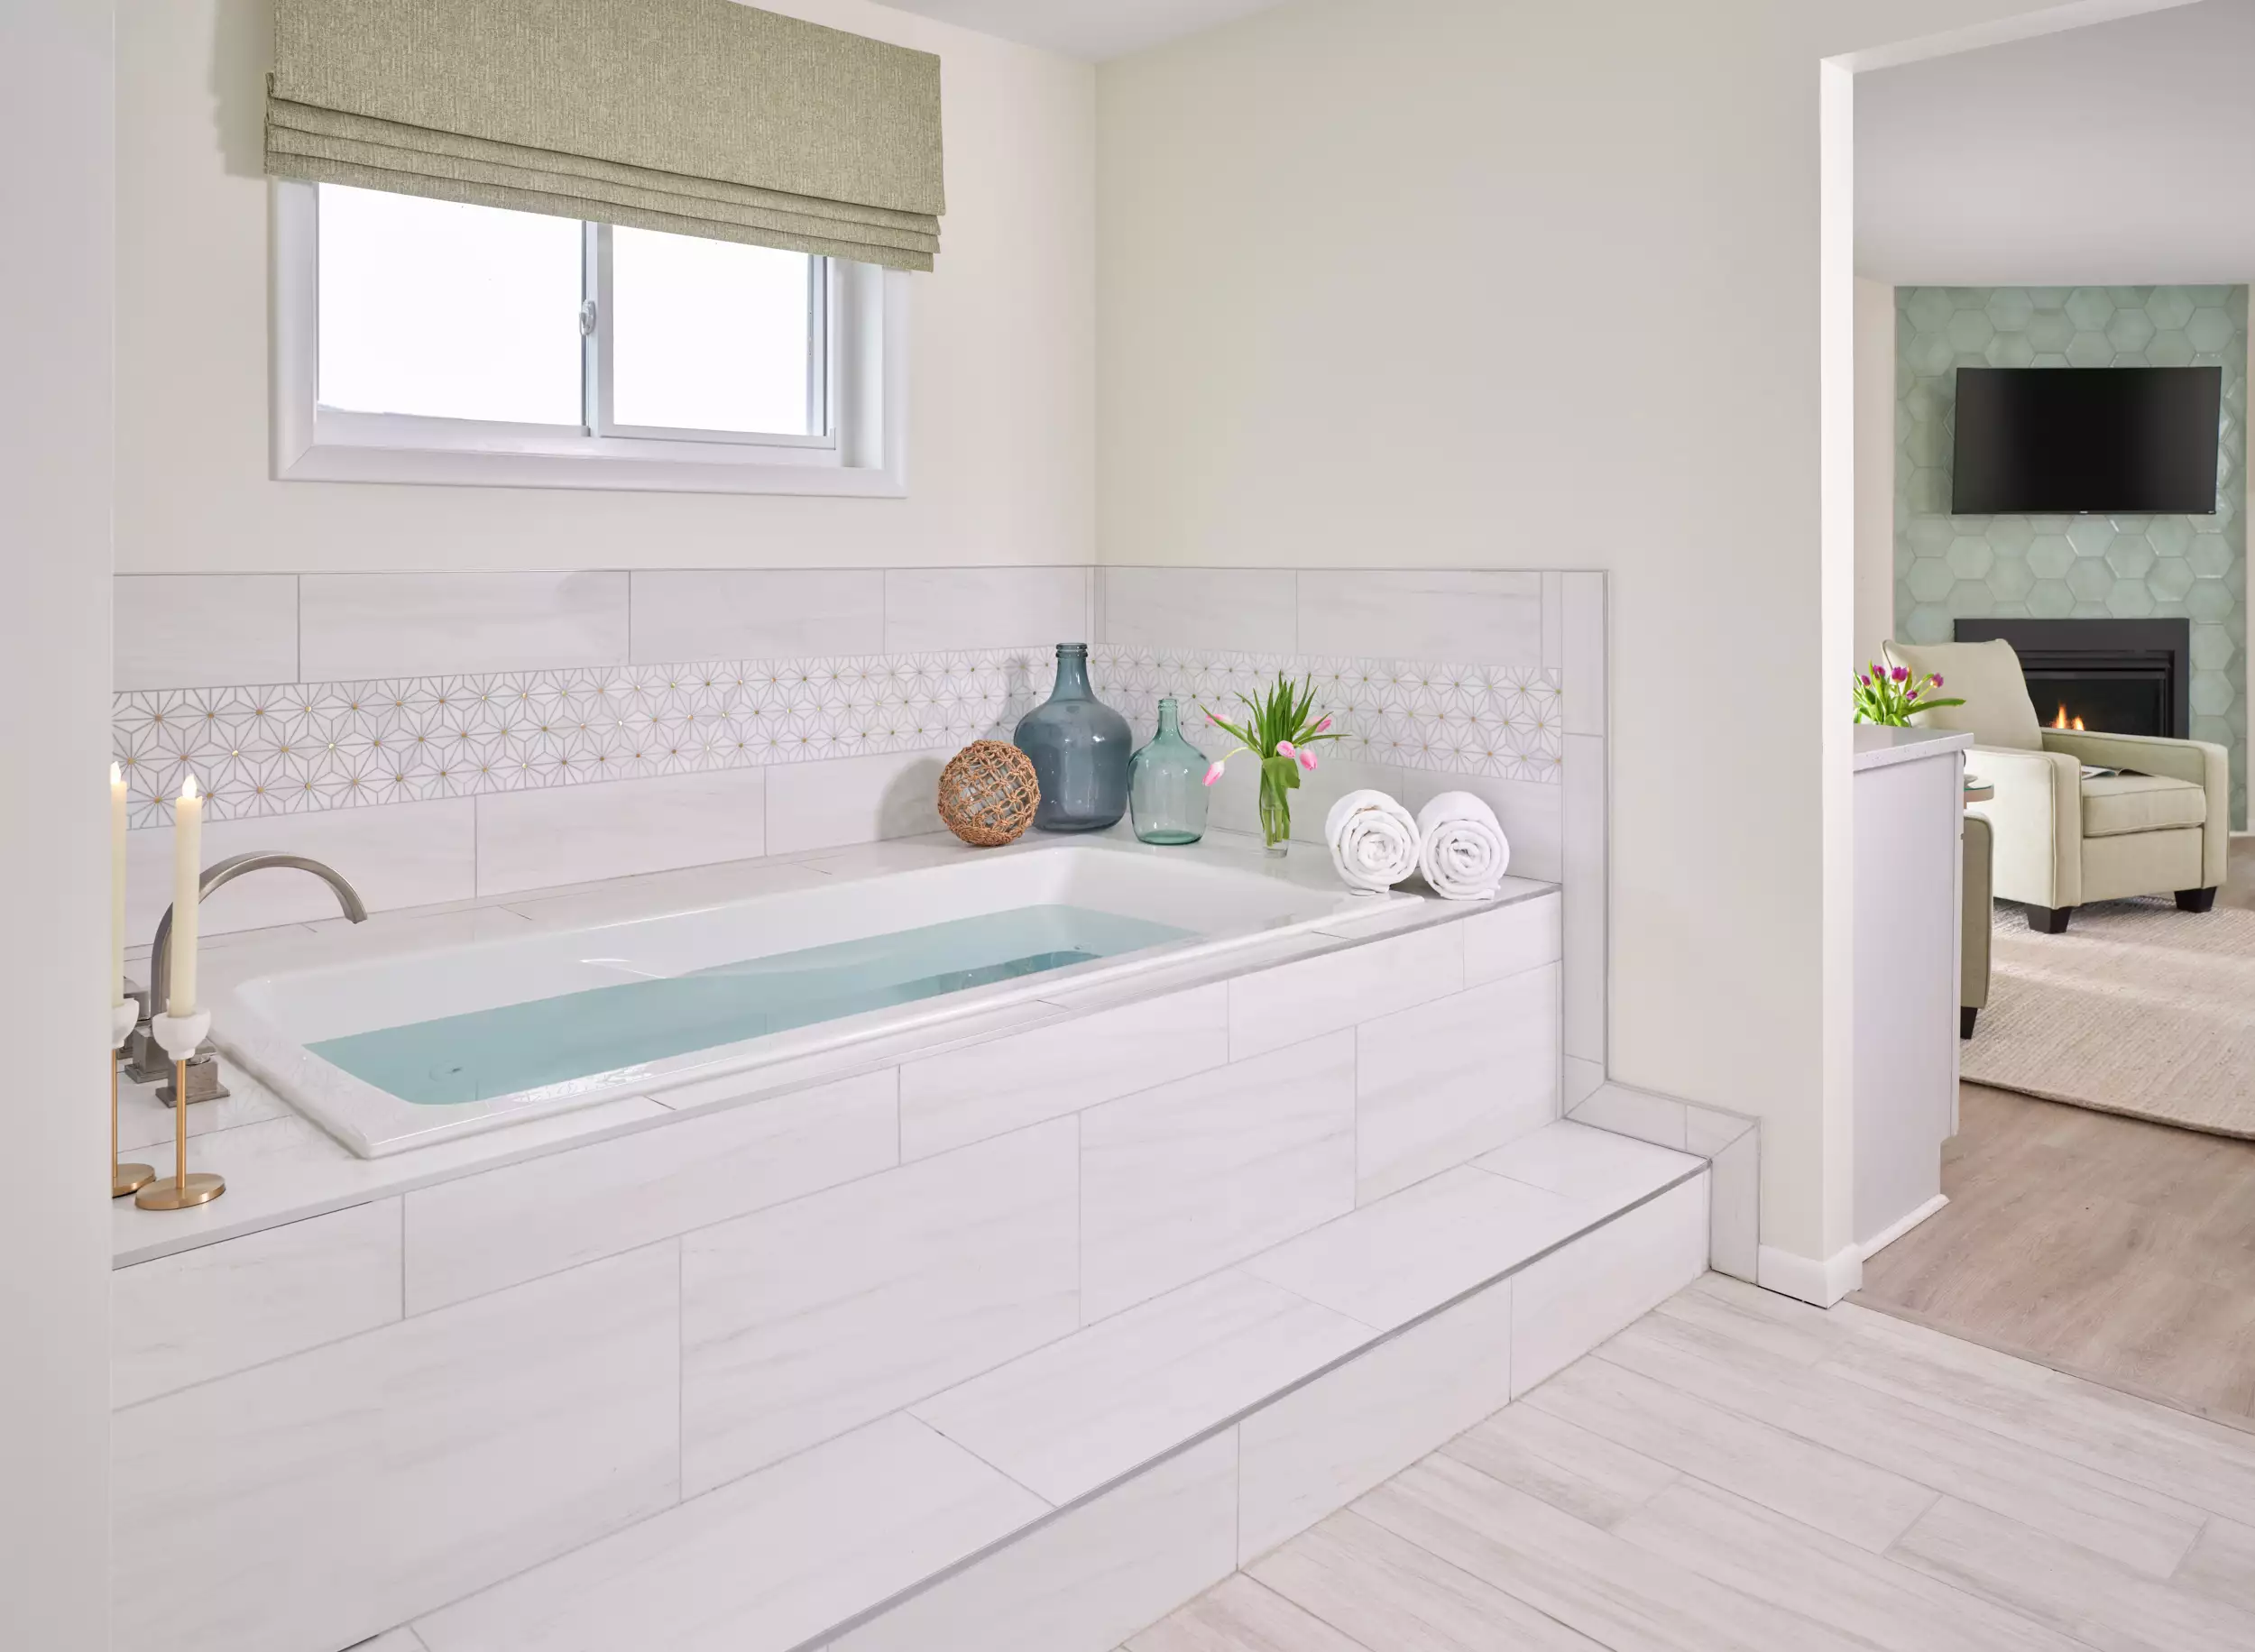 Two person jetted tub with modern finishes